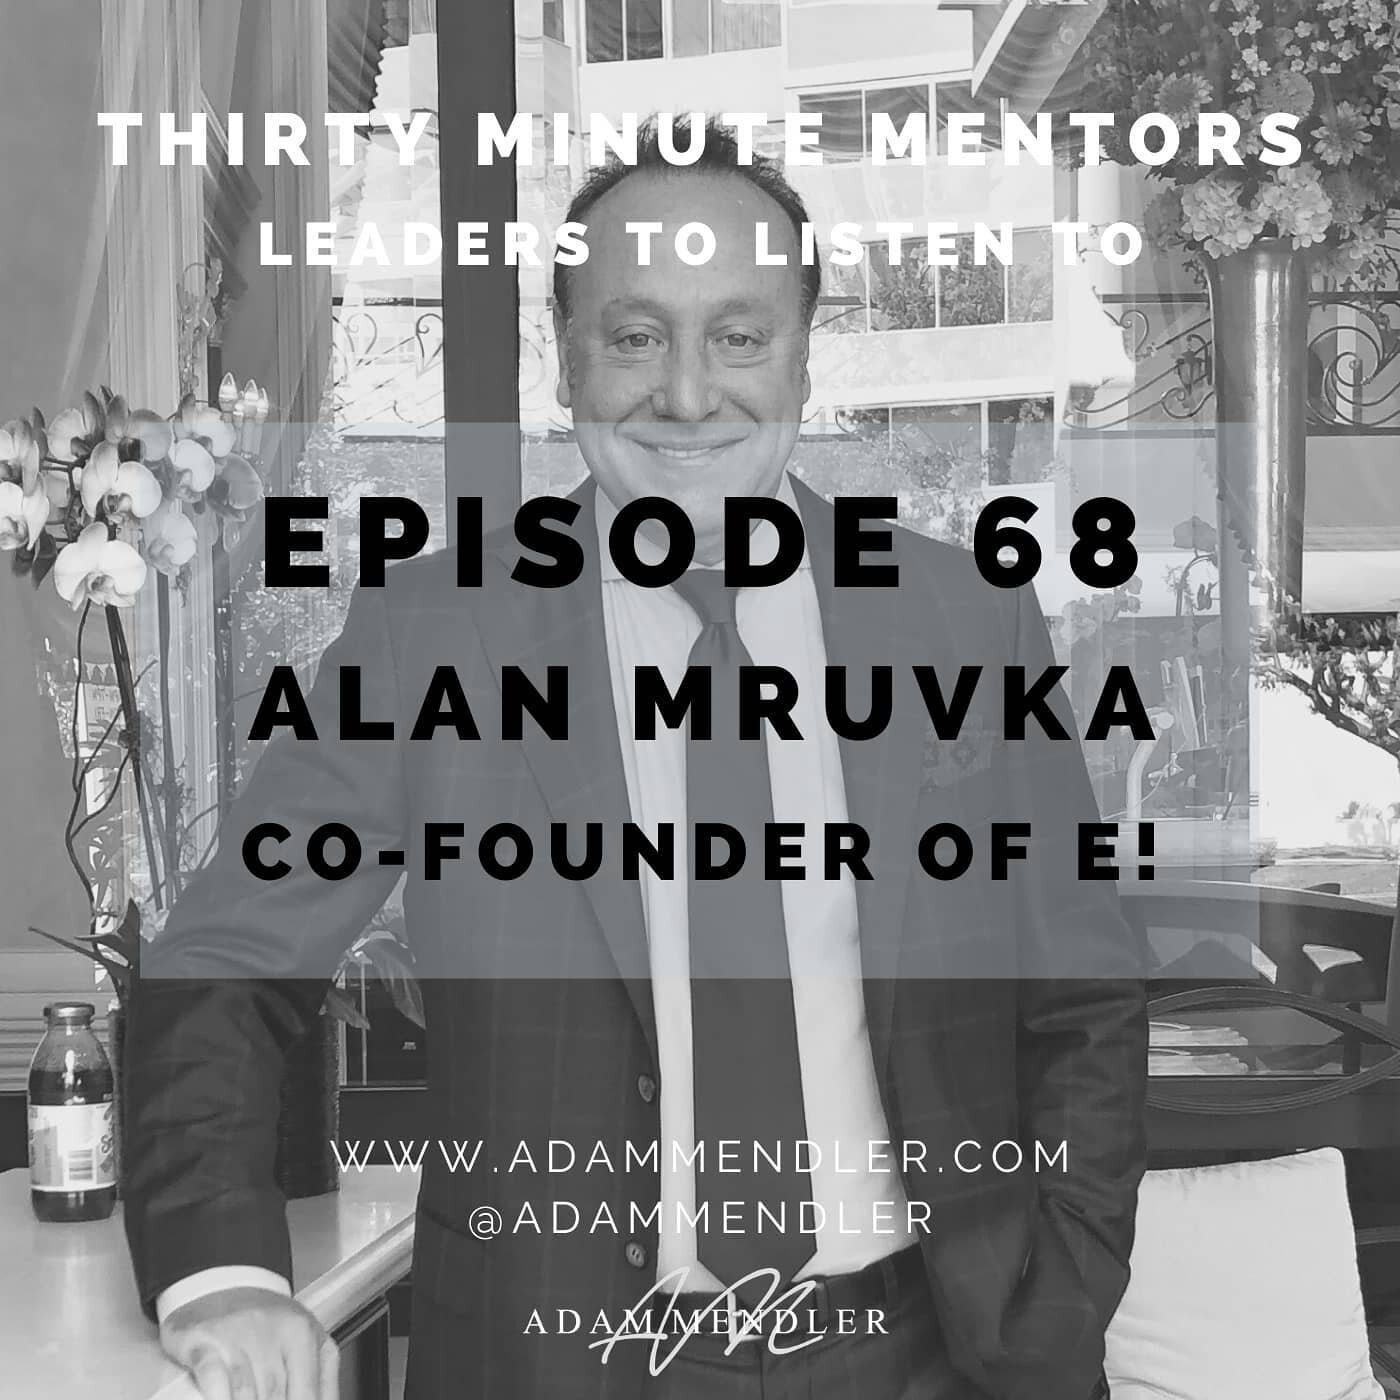 The co-founder of E!, Alan Mruvka led the fastest-growing cable network startup in television history. Alan joined me on Episode 68 of Thirty Minute Mentors to share his entrepreneurial journey and best lessons learned along the way. Listen and subsc